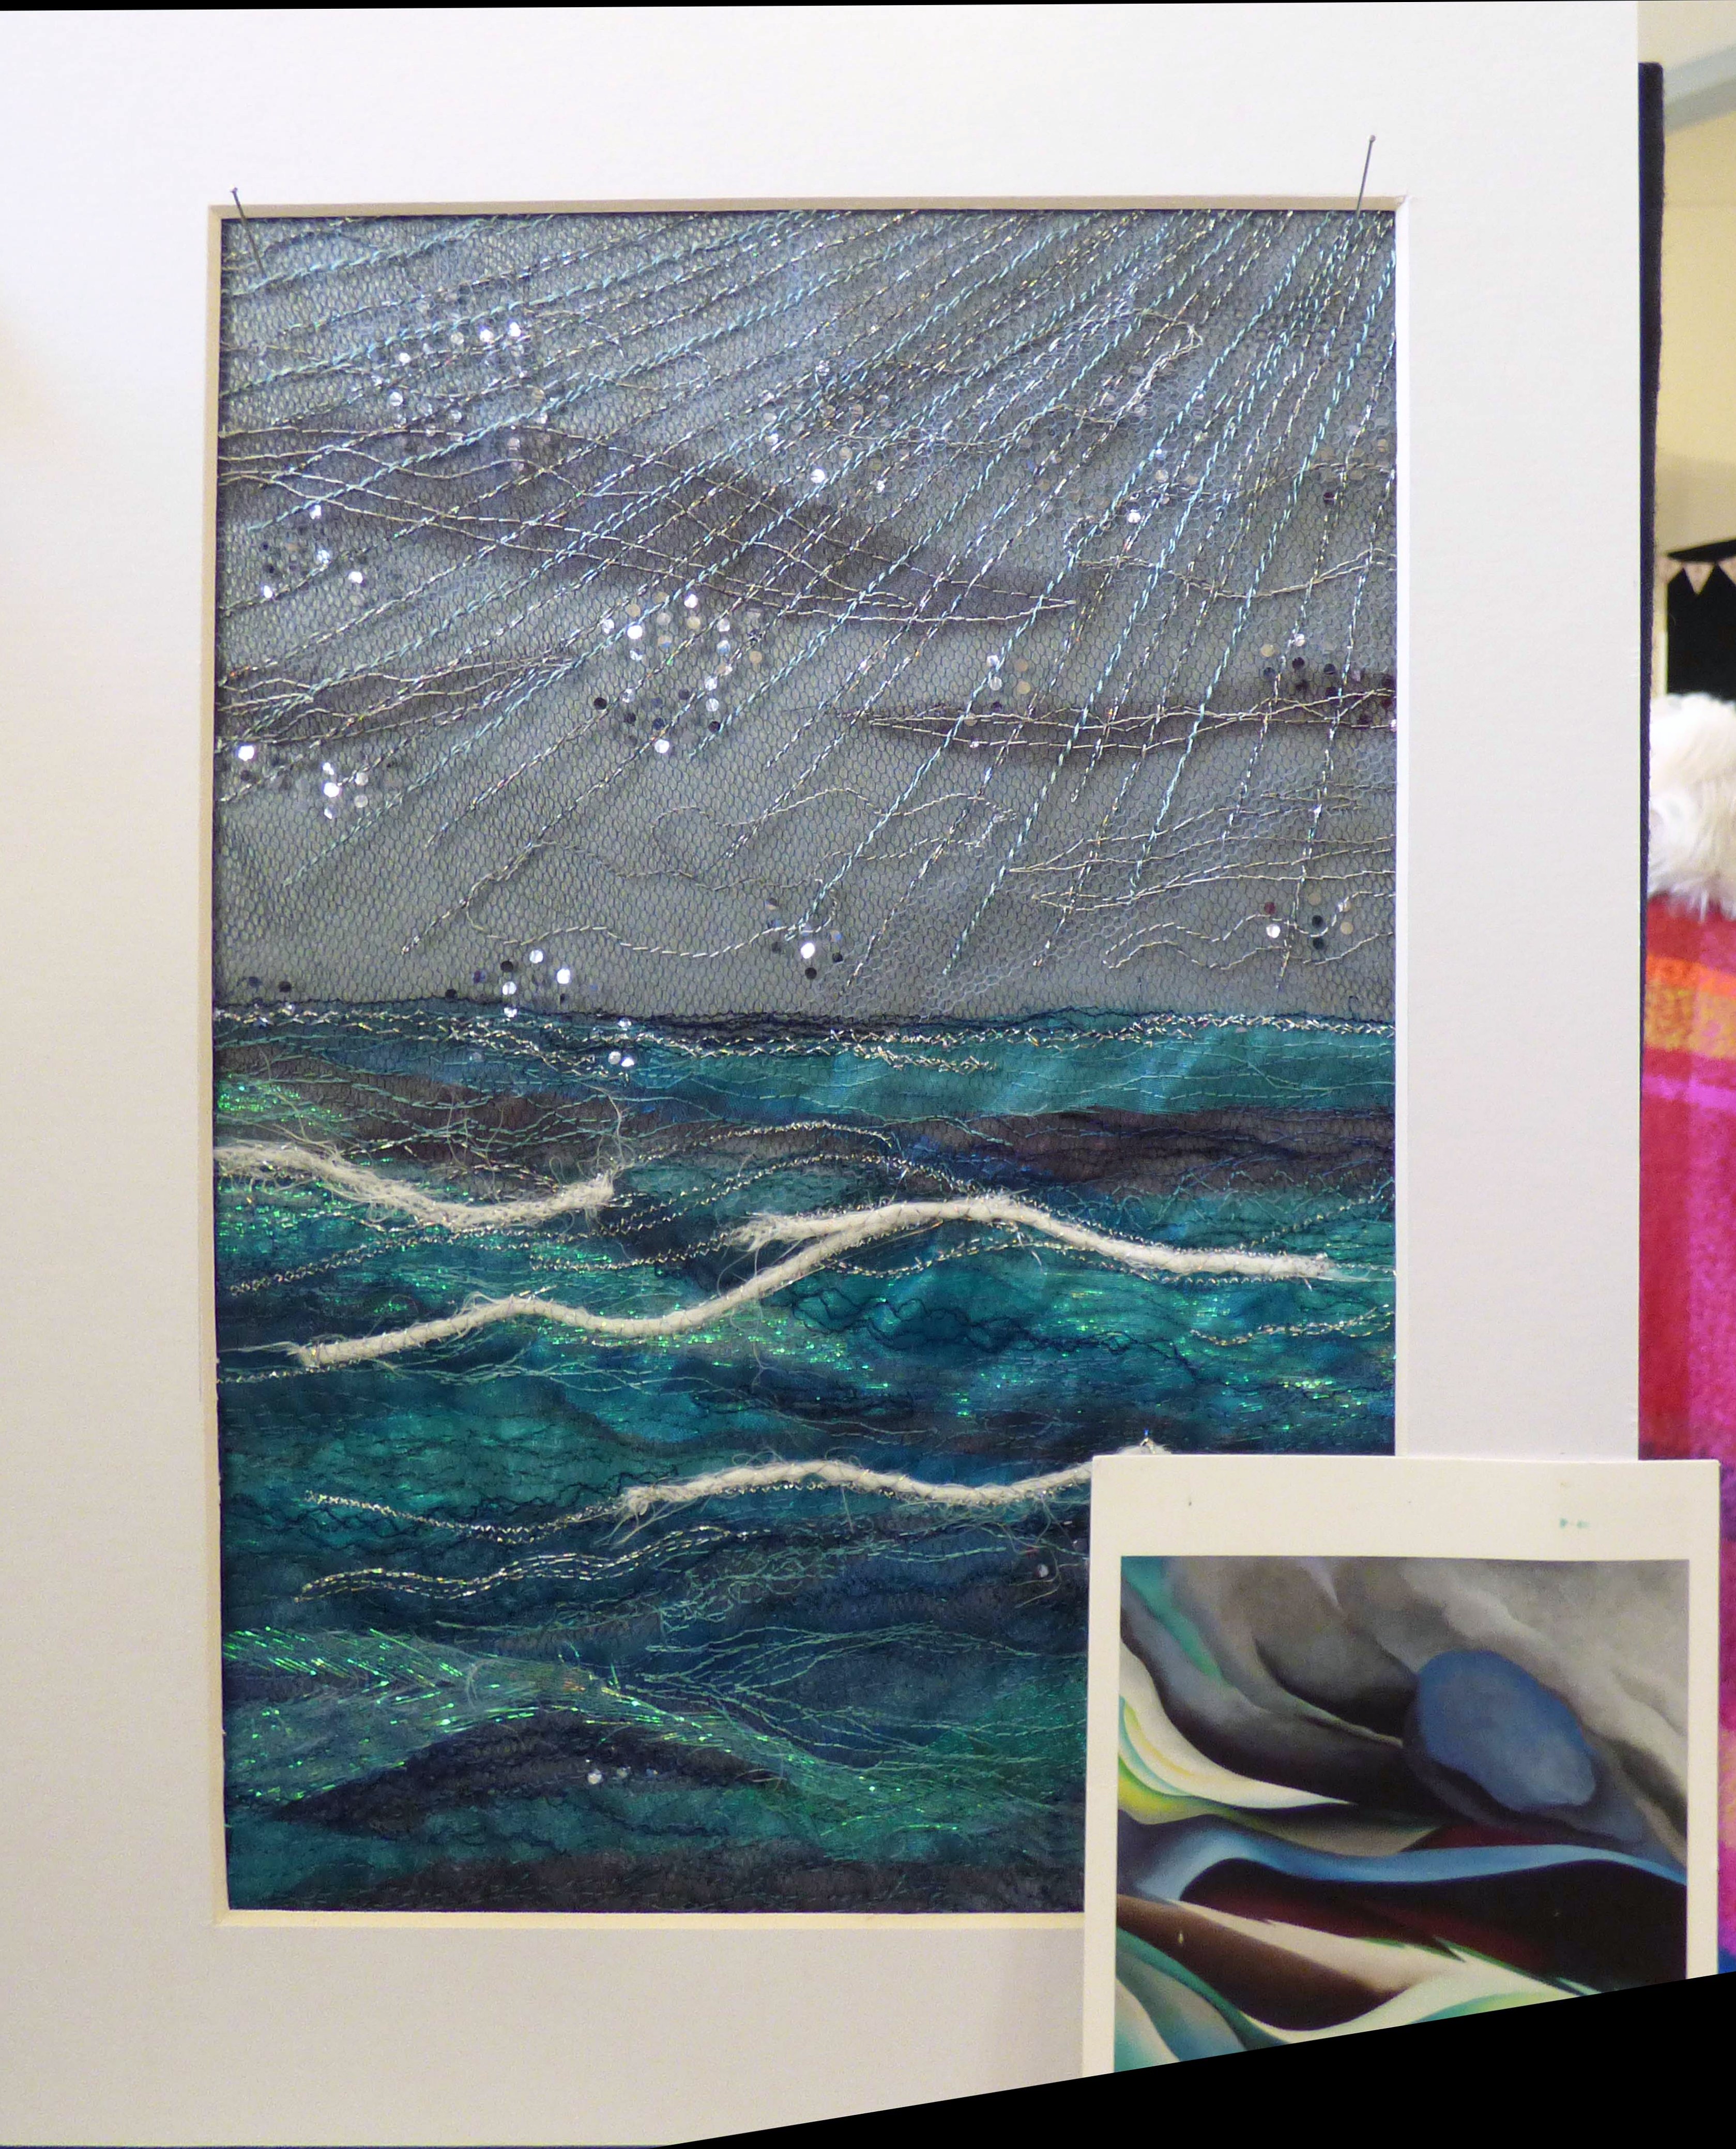 Diane Moore won 1st Prize in the"From Postcard to Stitch" competition, January 2022